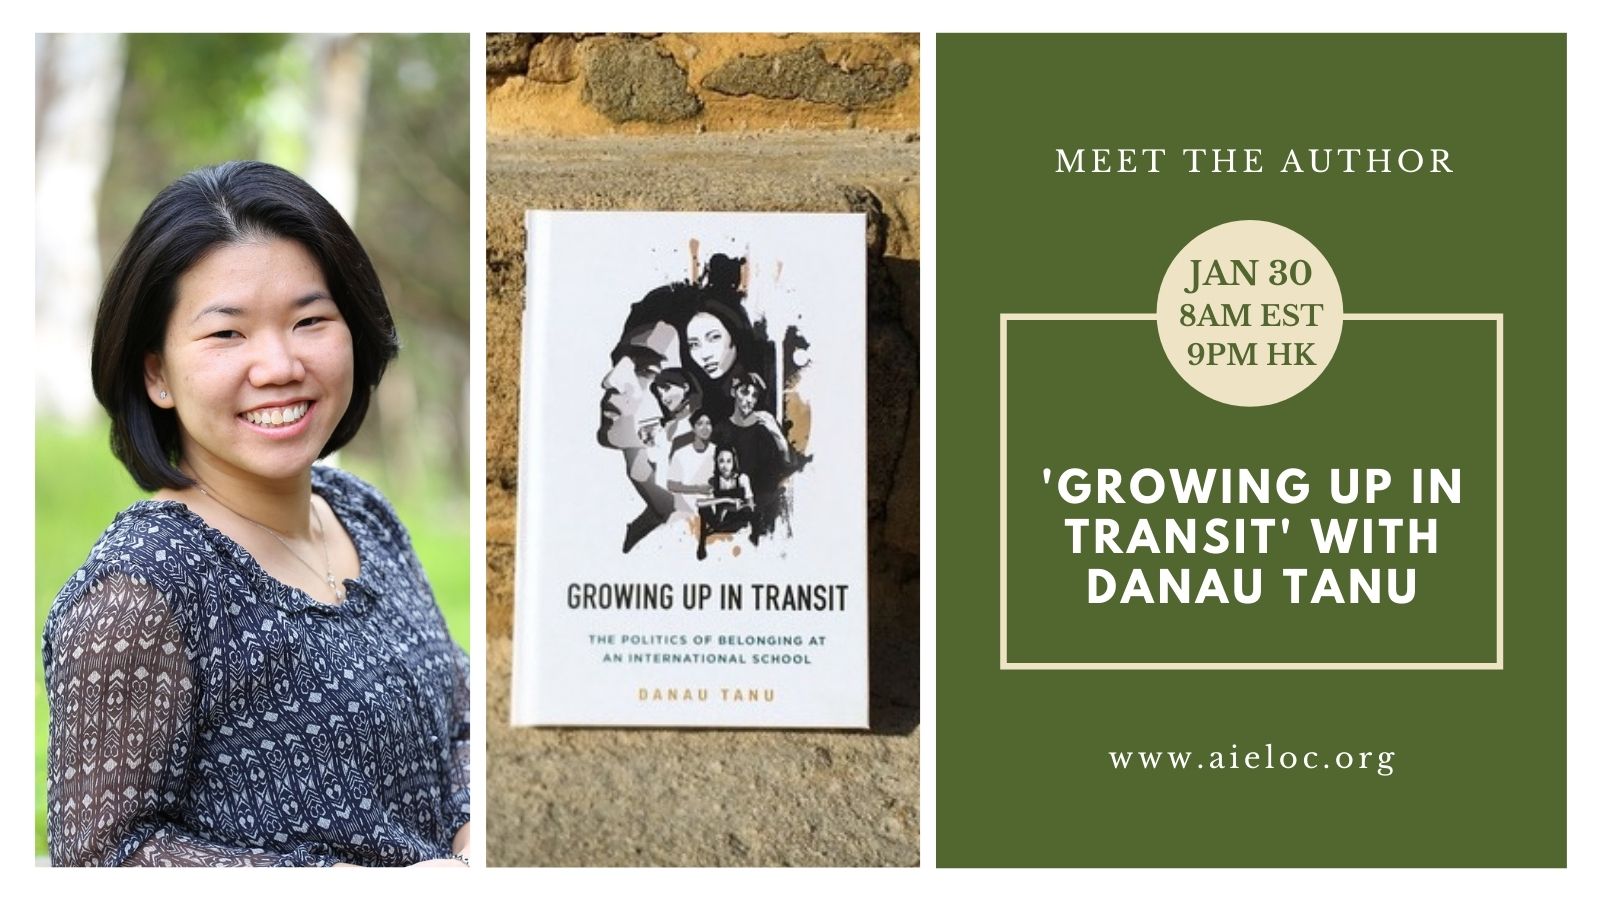 Meet the Author. Jan 30, 8am EST. Growing Up in Transit with Danau Tanu. www.aieloc.org